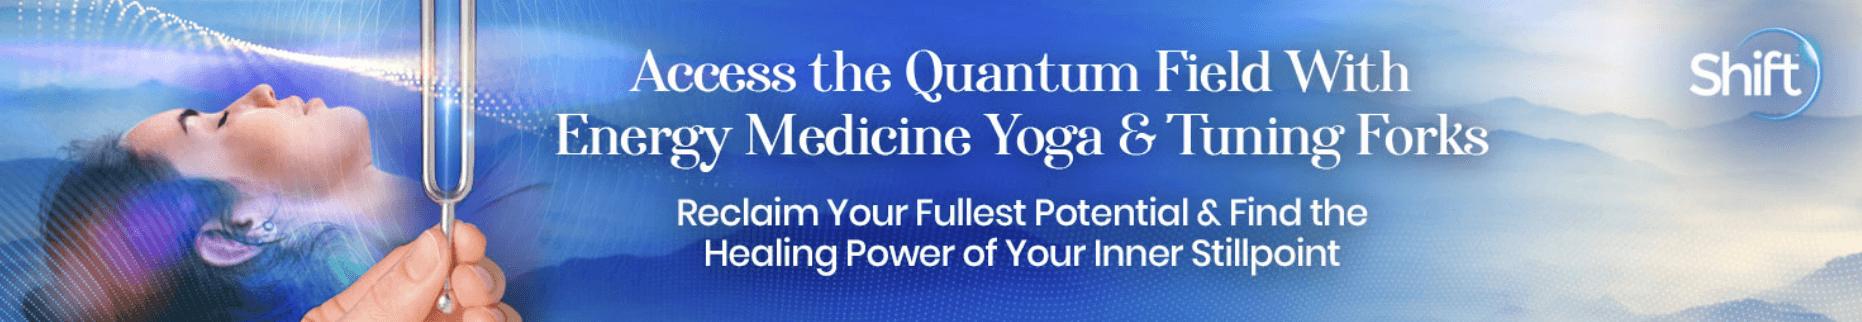 Lauren Walker - The Shift Network - Access the Quantum Field With Energy Medicine Yoga & Tuning Forks